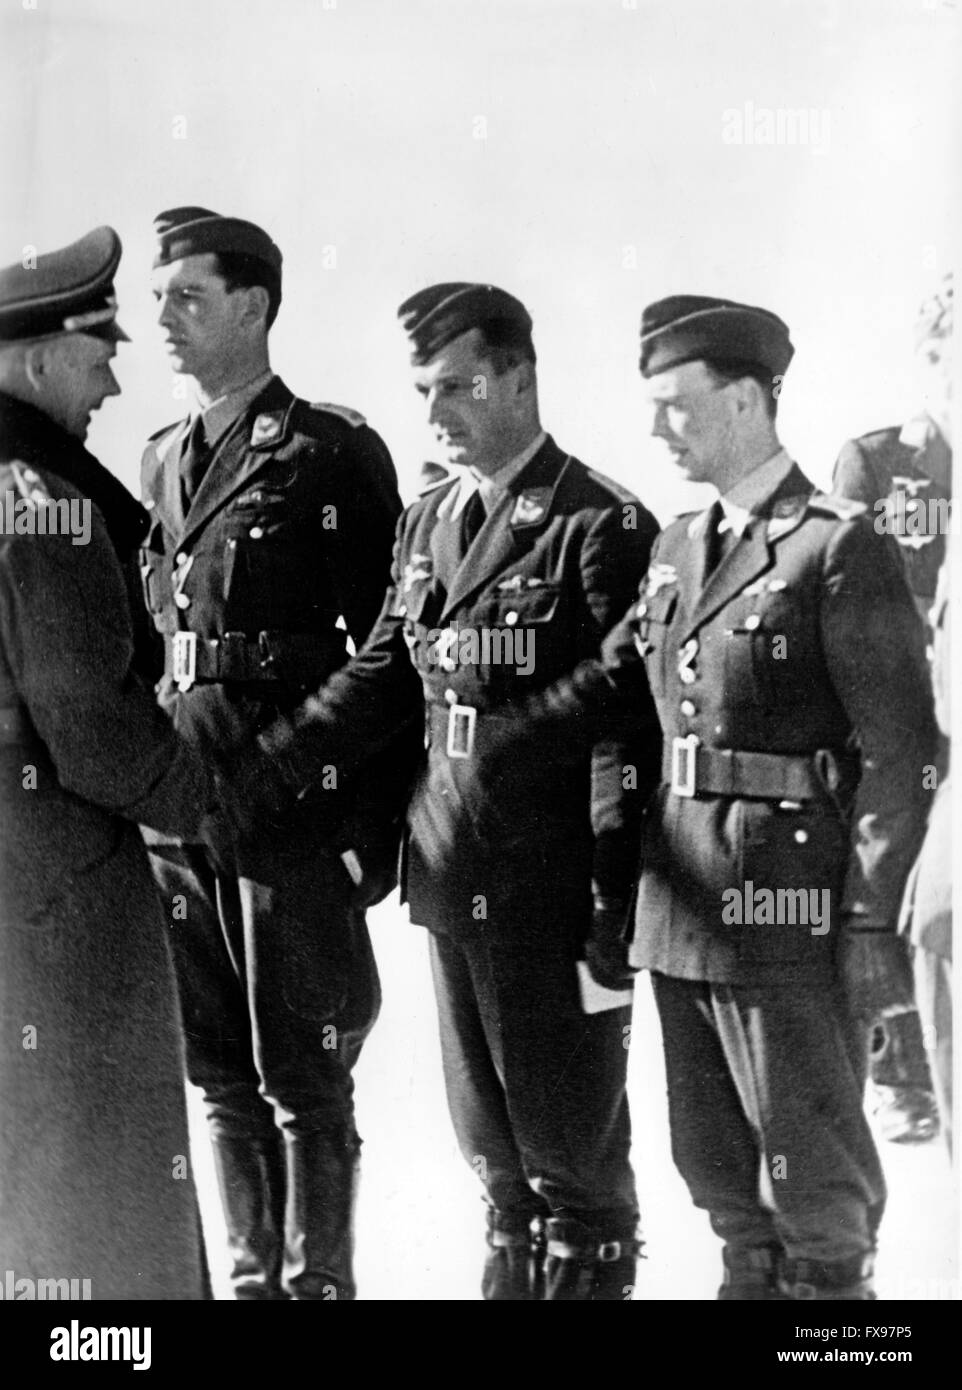 The Nazi propaganda image depicts the German colonel general Wolfram von Richthofen (L) during an award ceremony for pilots of a Croatian squadron of the German Wehrmacht on the Eastern Front. The photo was taken in March 1942. Fotoarchiv für Zeitgeschichte Archive - NO WIRE SERVICE - Stock Photo